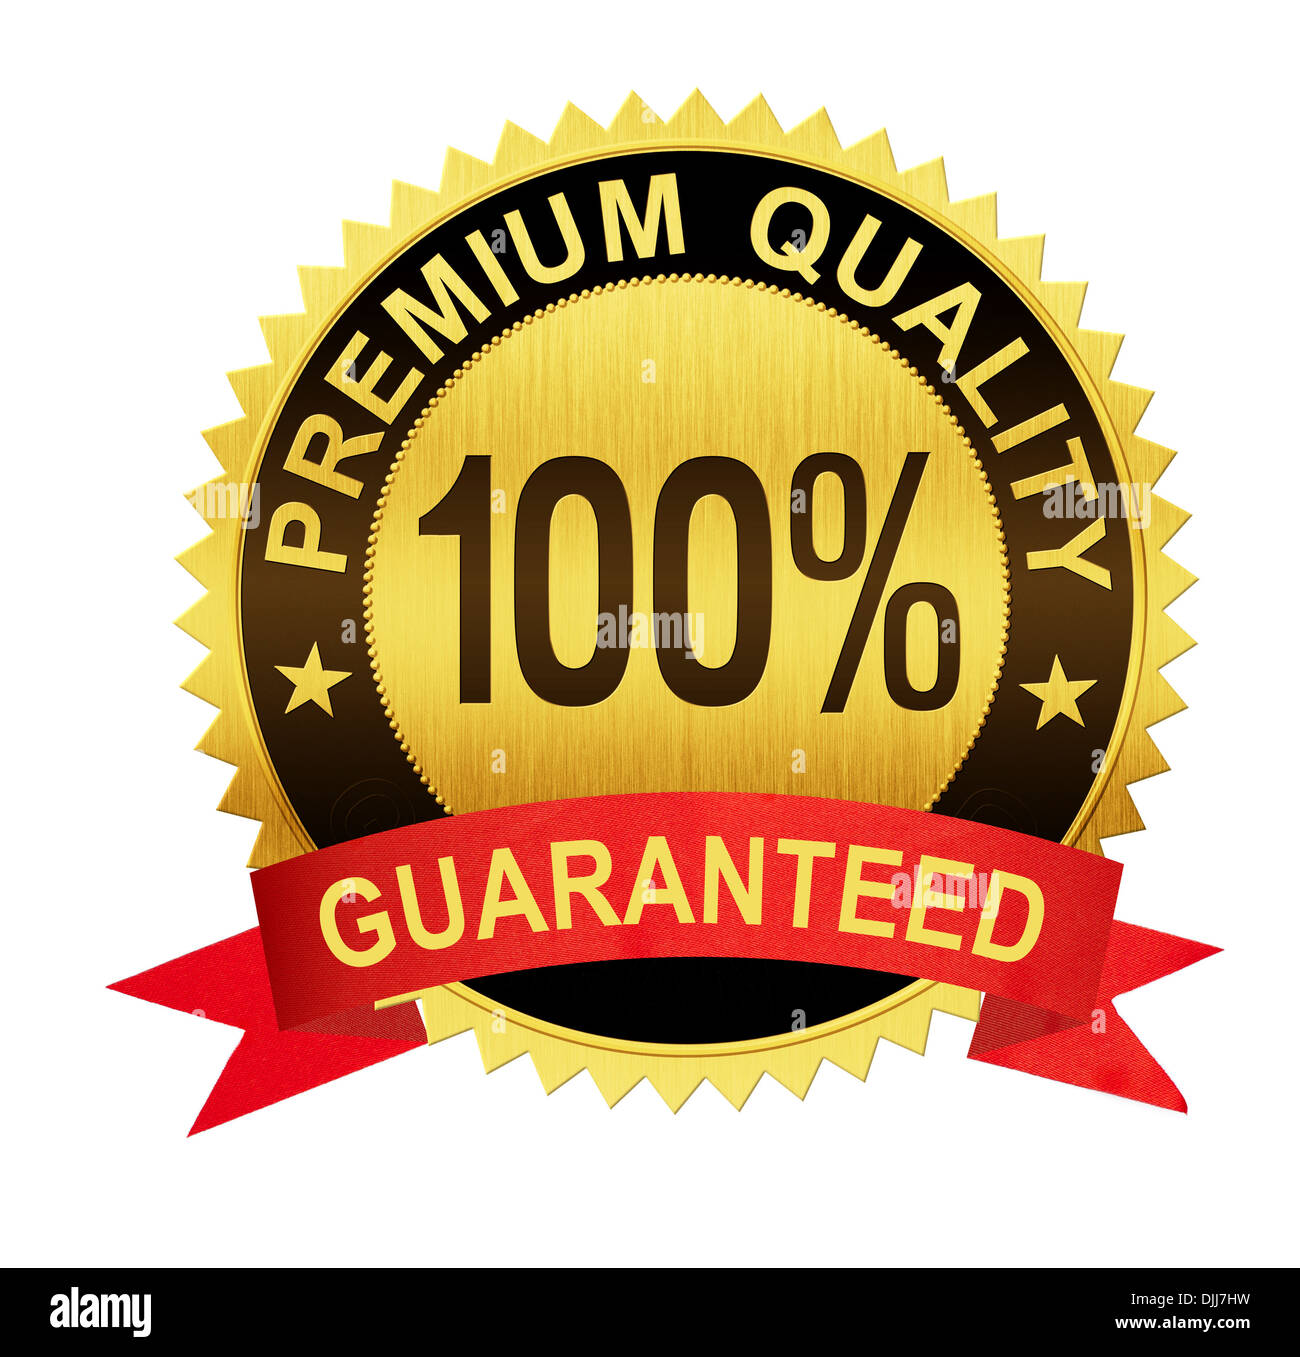 premium quality guaranteed gold seal medal with red ribbon isolated Stock Photo